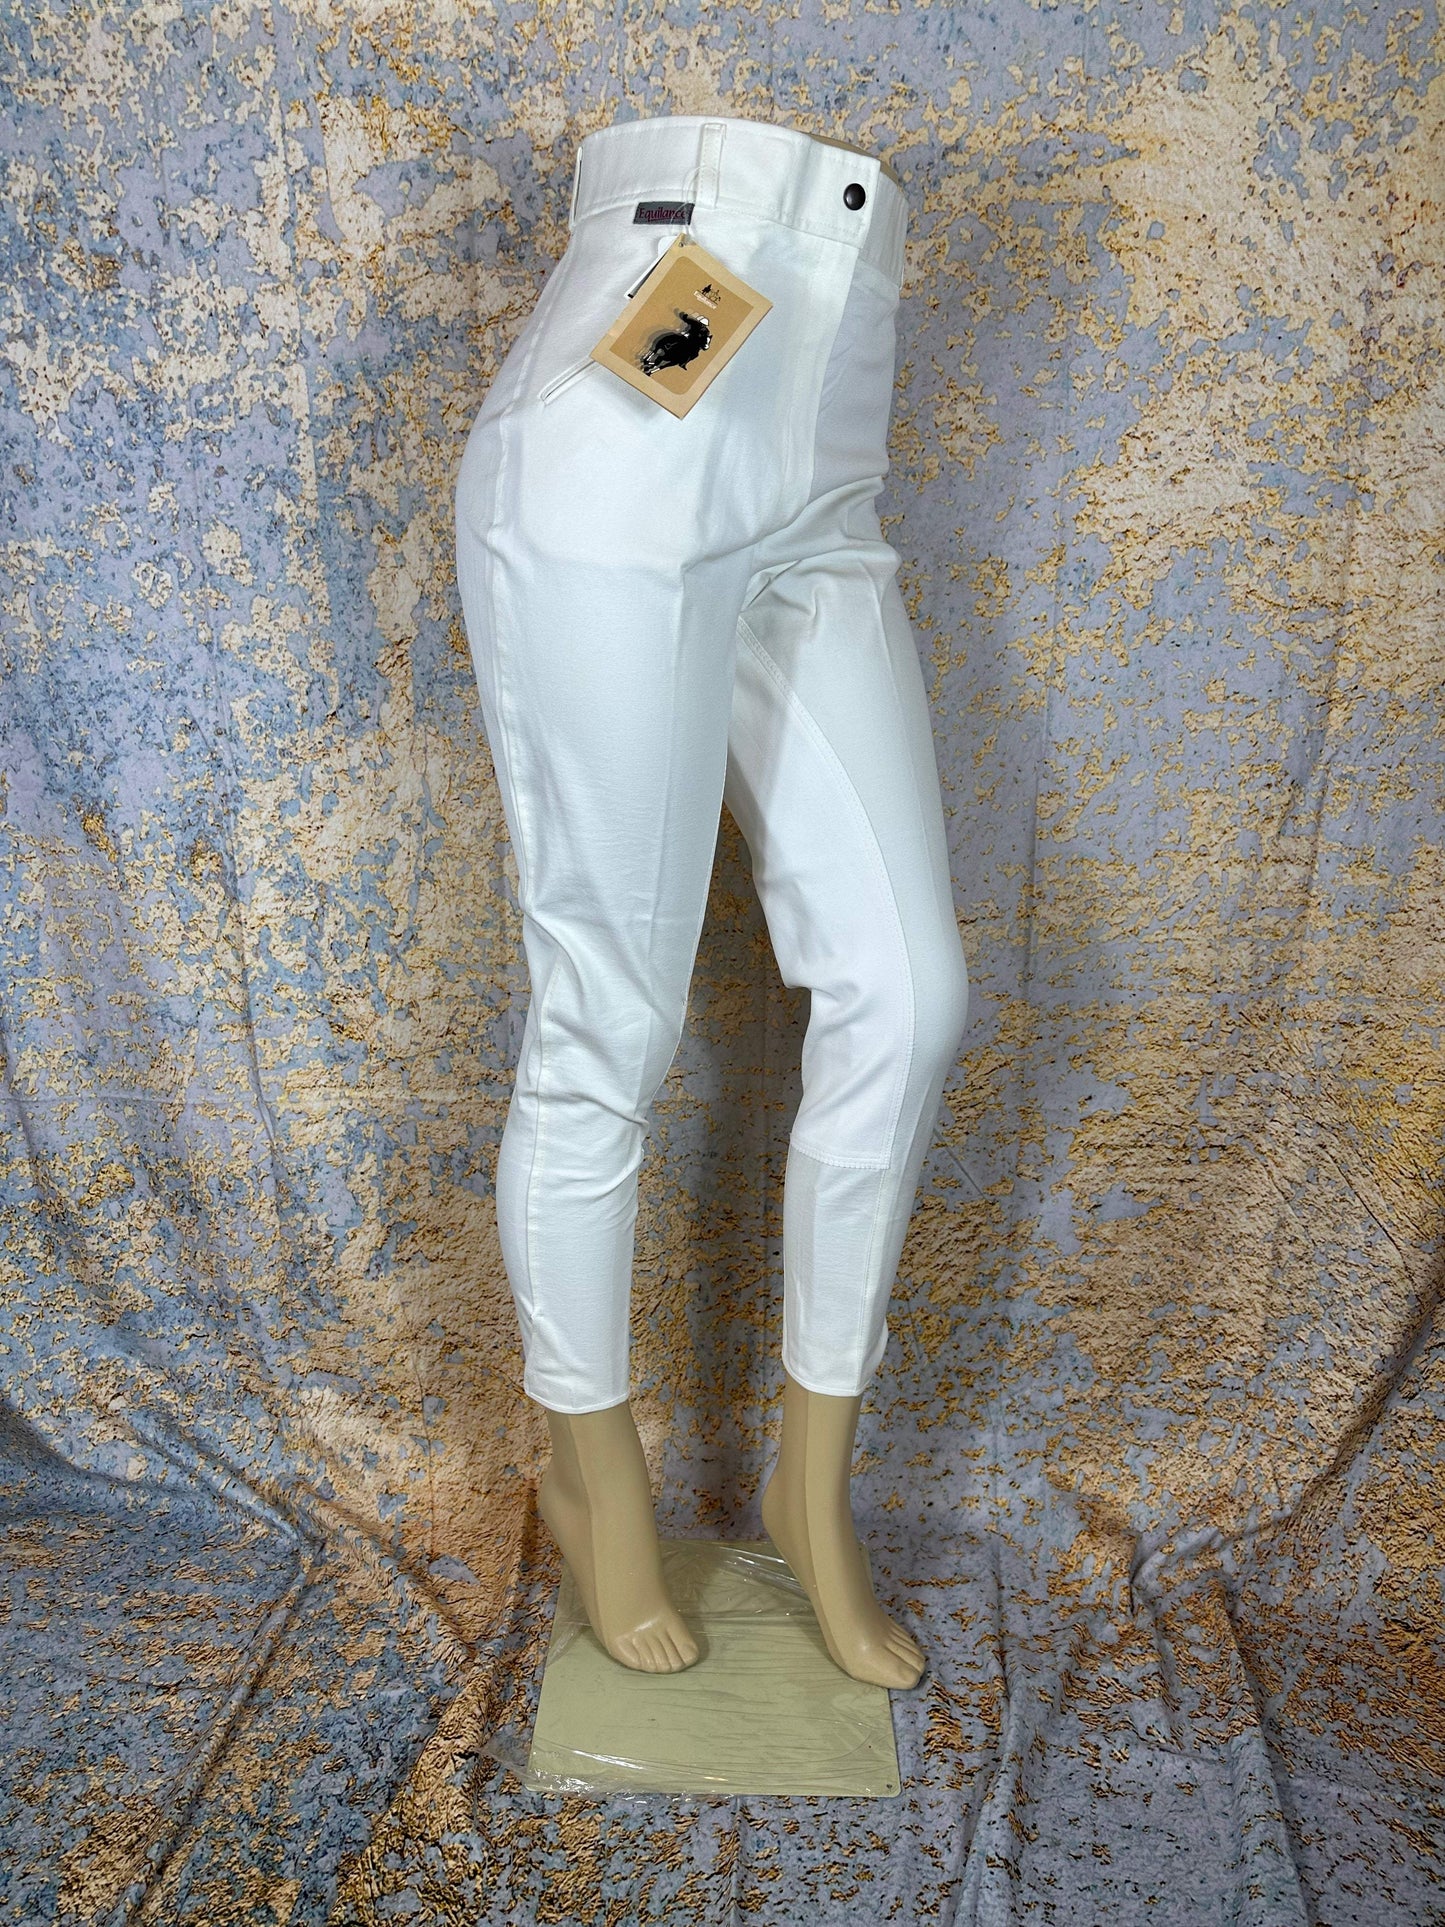 Equilance Ladies White Full Seat Breeches Size 44